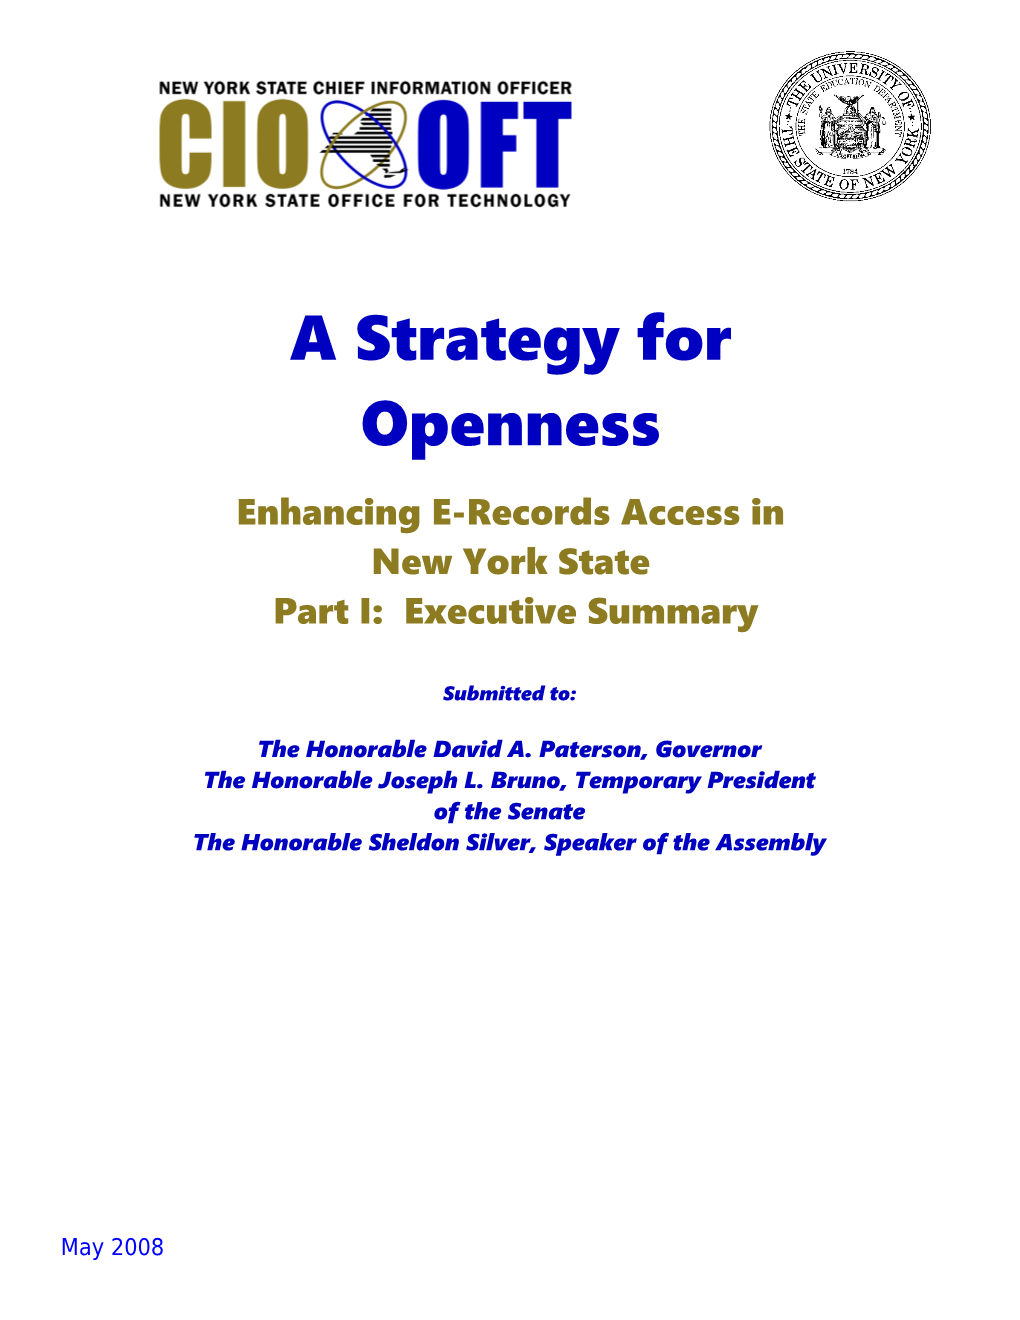 A Strategy for Openness Part I Executive Summary